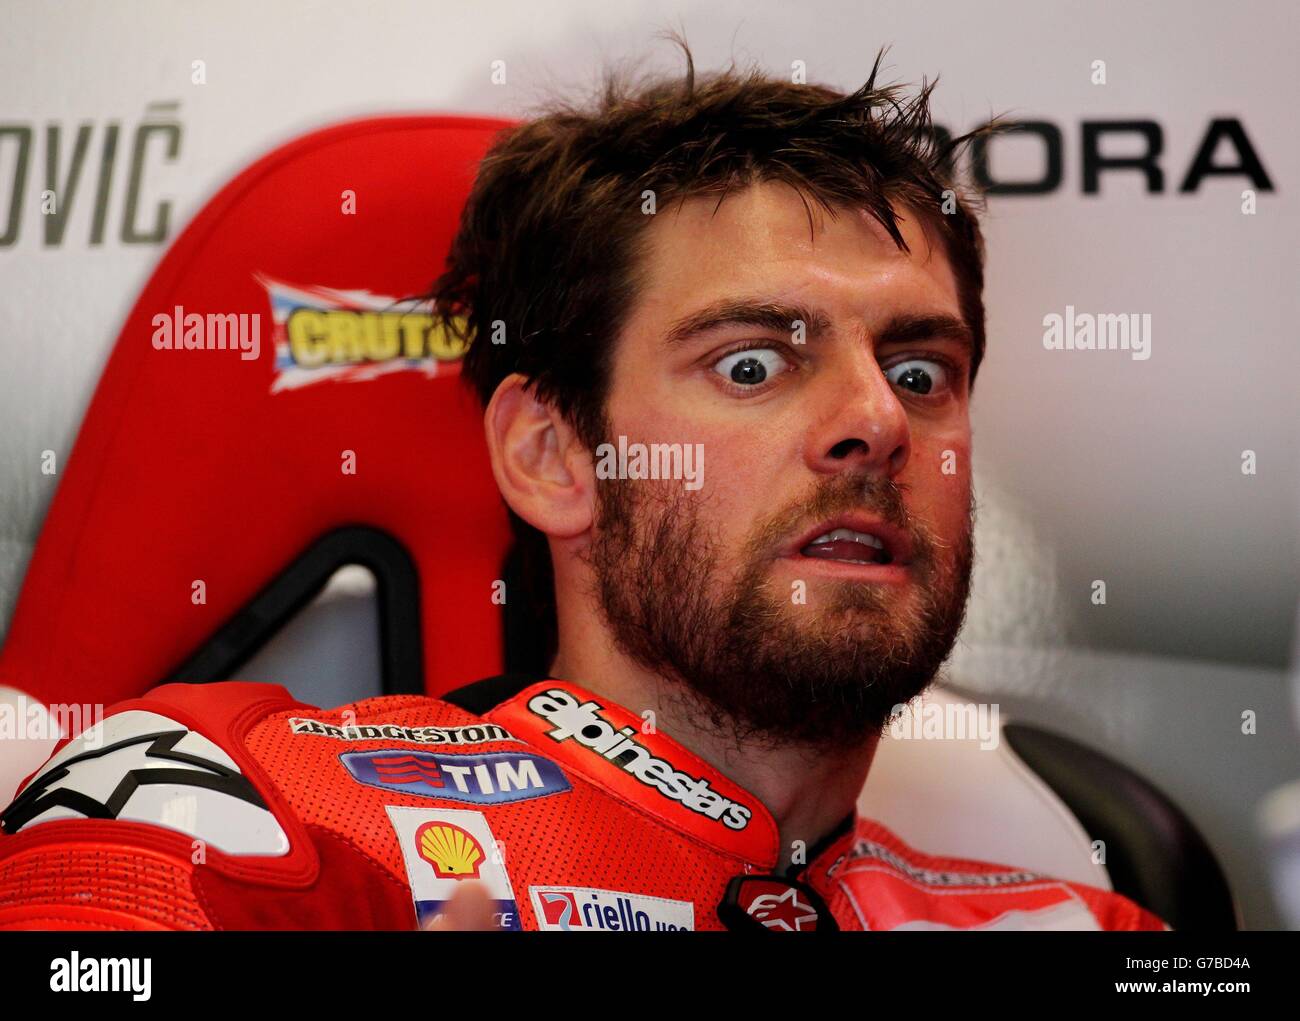 Ducati's Cal Crutchlow during morning warm up before the Moto GP Hertz British Grand Prix race at Silverstone Circuit, Northamptonshire. Stock Photo